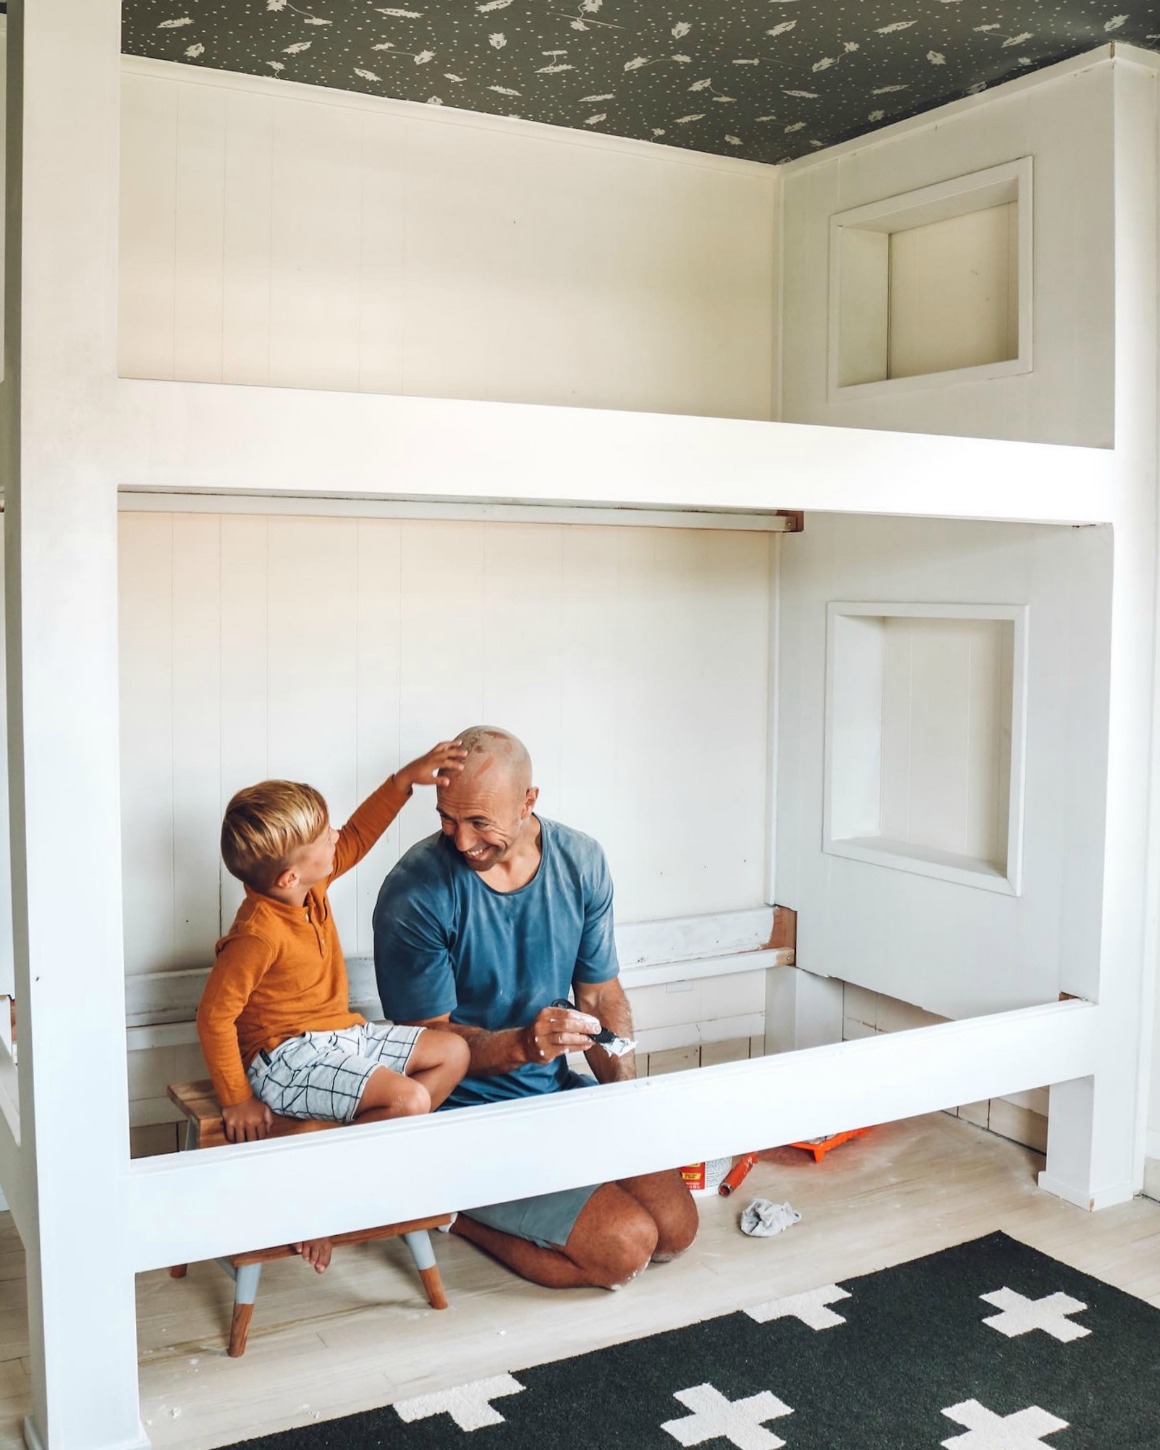 Built In Bunkbed Diy For 500 Nesting, Build Your Own Bunk Bed Plans